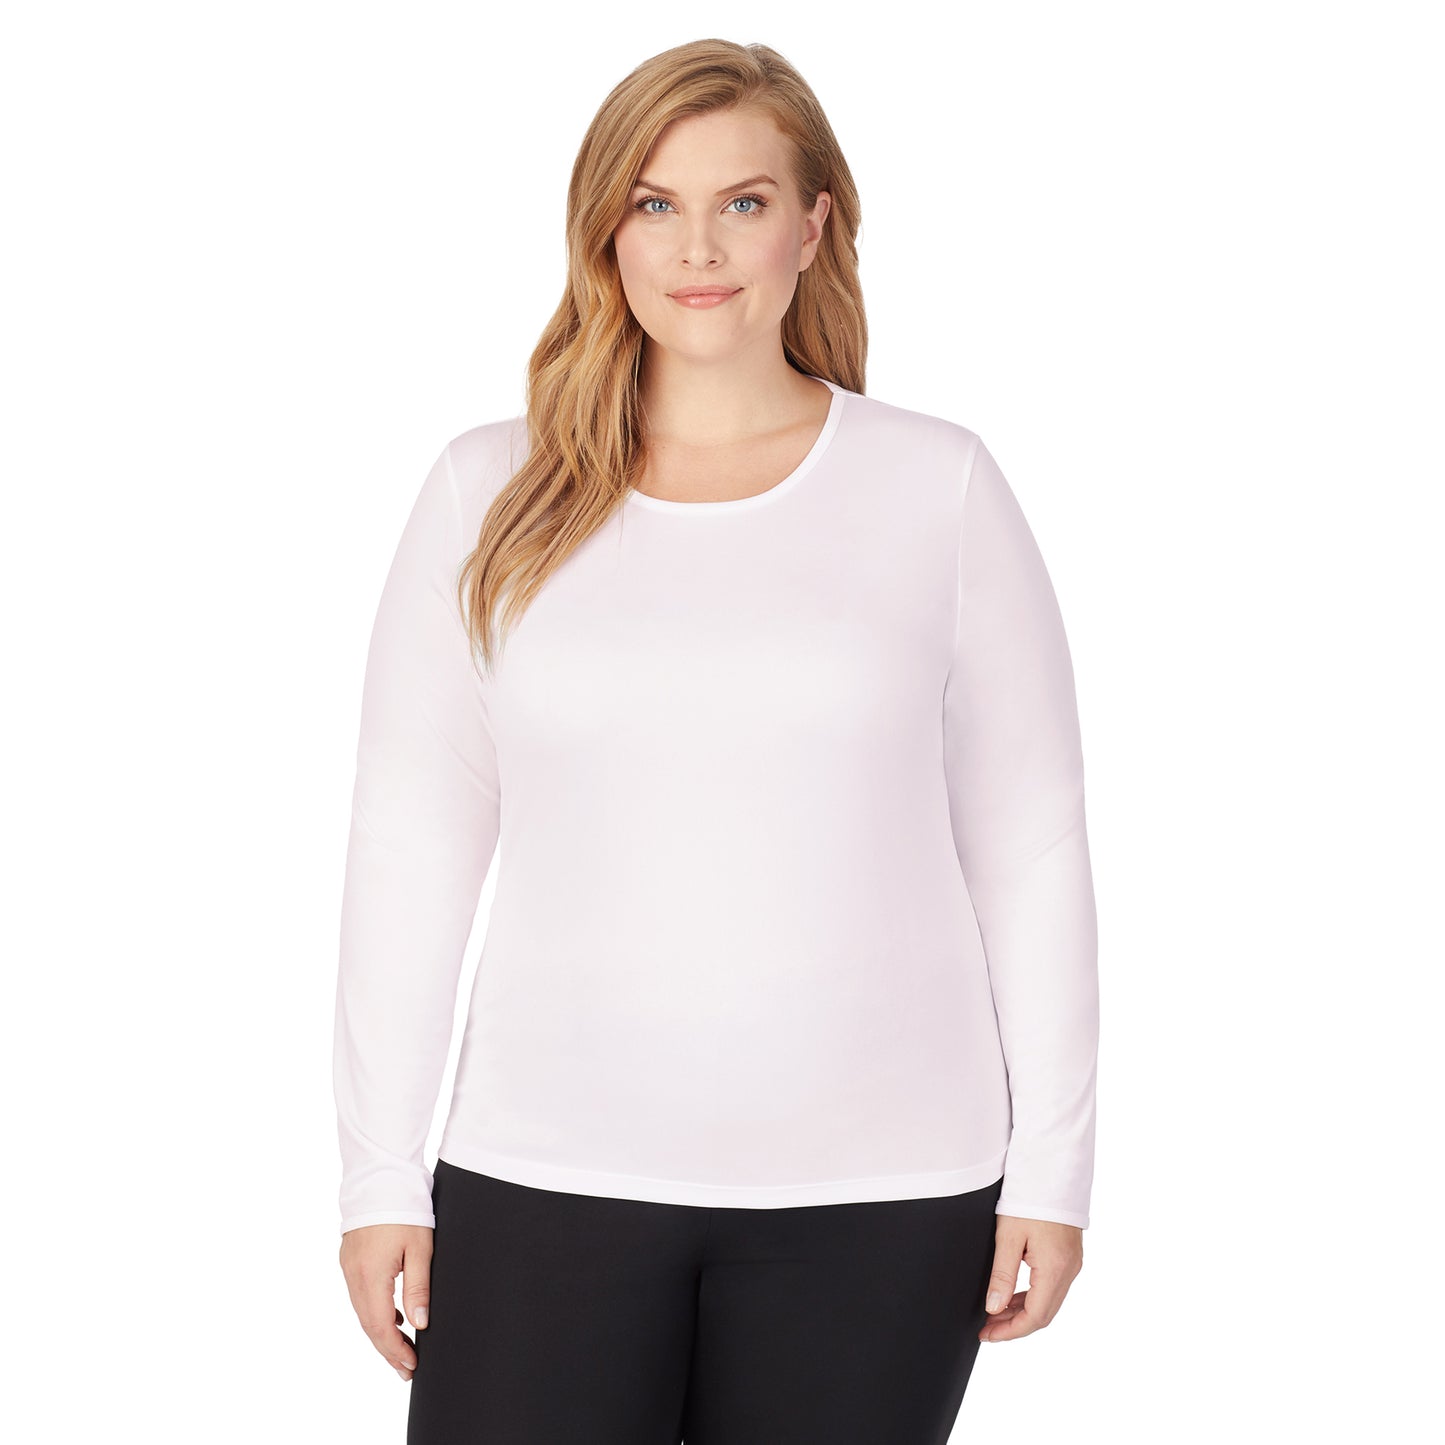 Blush; Model is wearing size 1X. She is 5'9", Bust 38", Waist 36", Hips 48.5".@upper body of A lady wearing blush pink long sleeve crew top